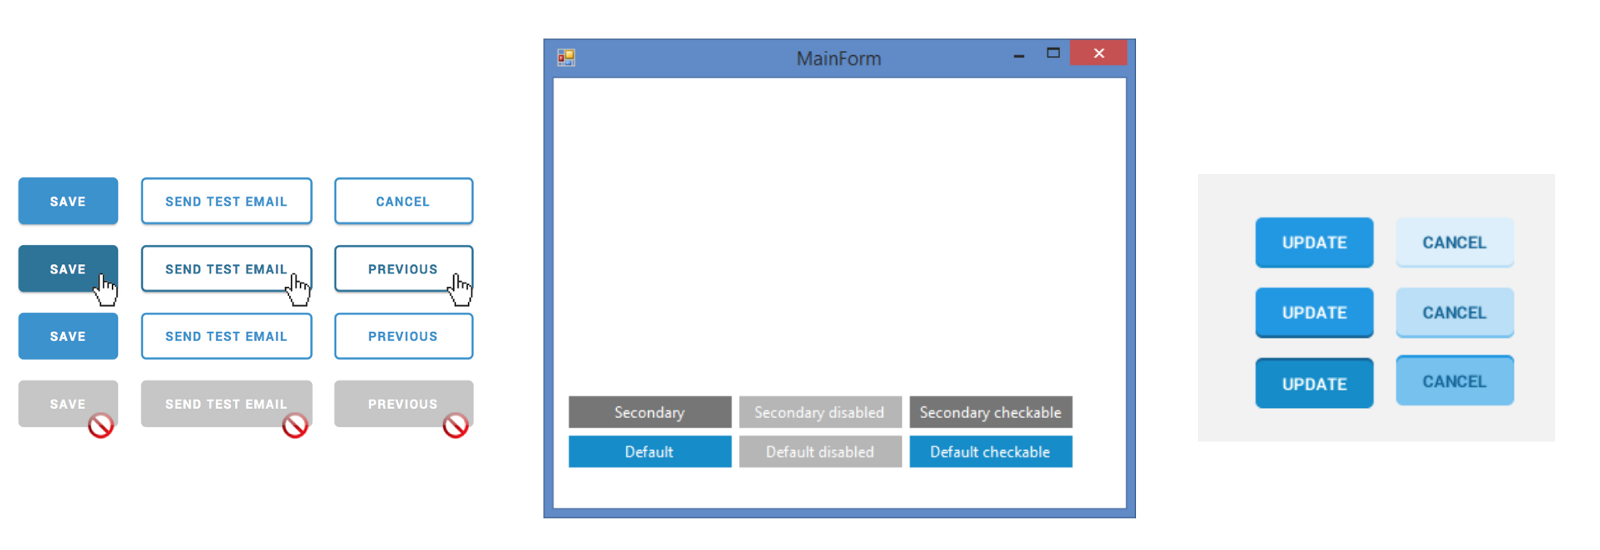 Diagram of buttons within a Windows platform